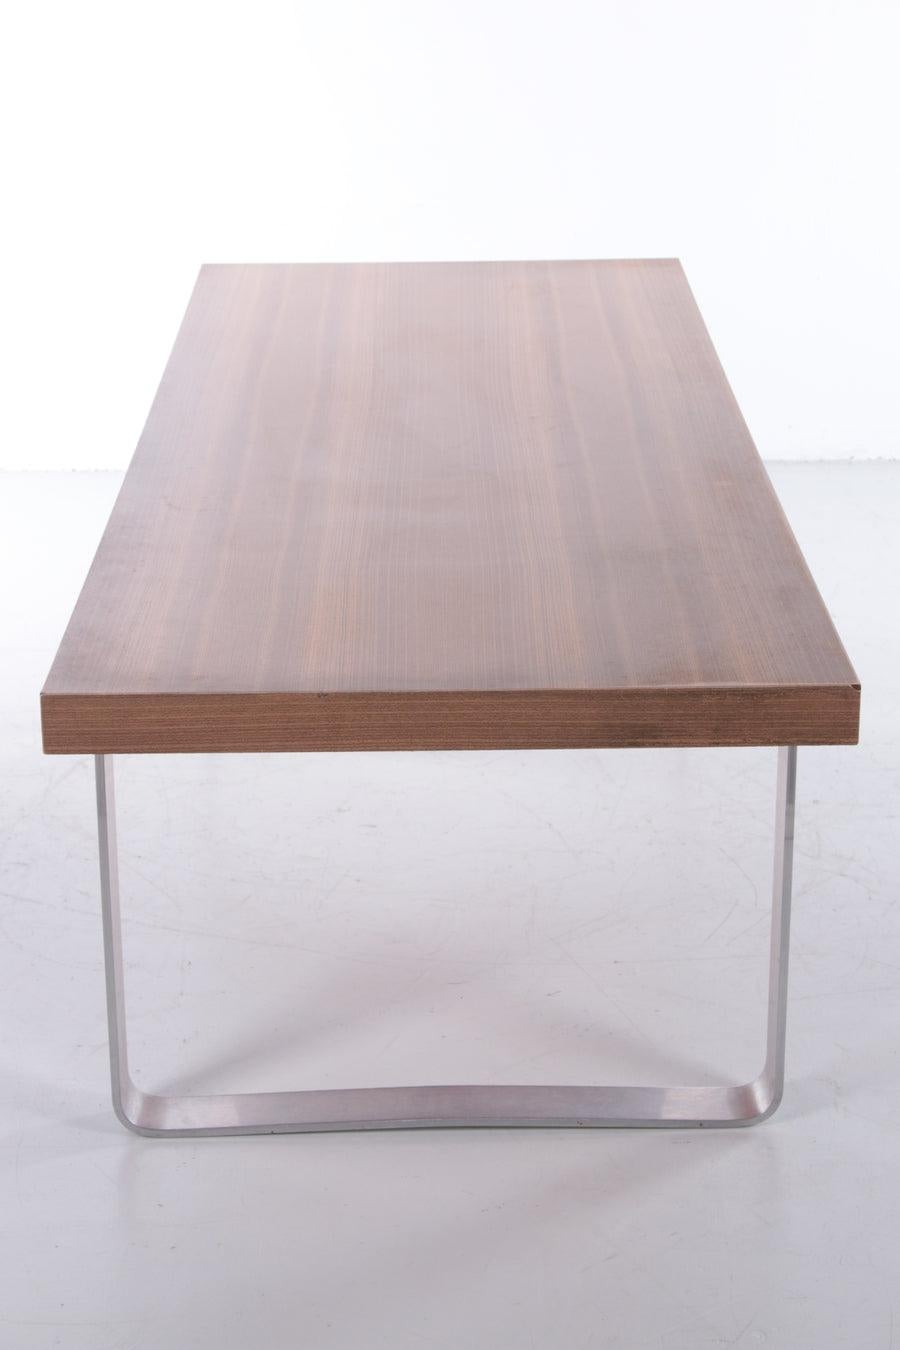 Mid-Century Modern Vintage long Coffee Table Wood and Chrome, 1970s For Sale